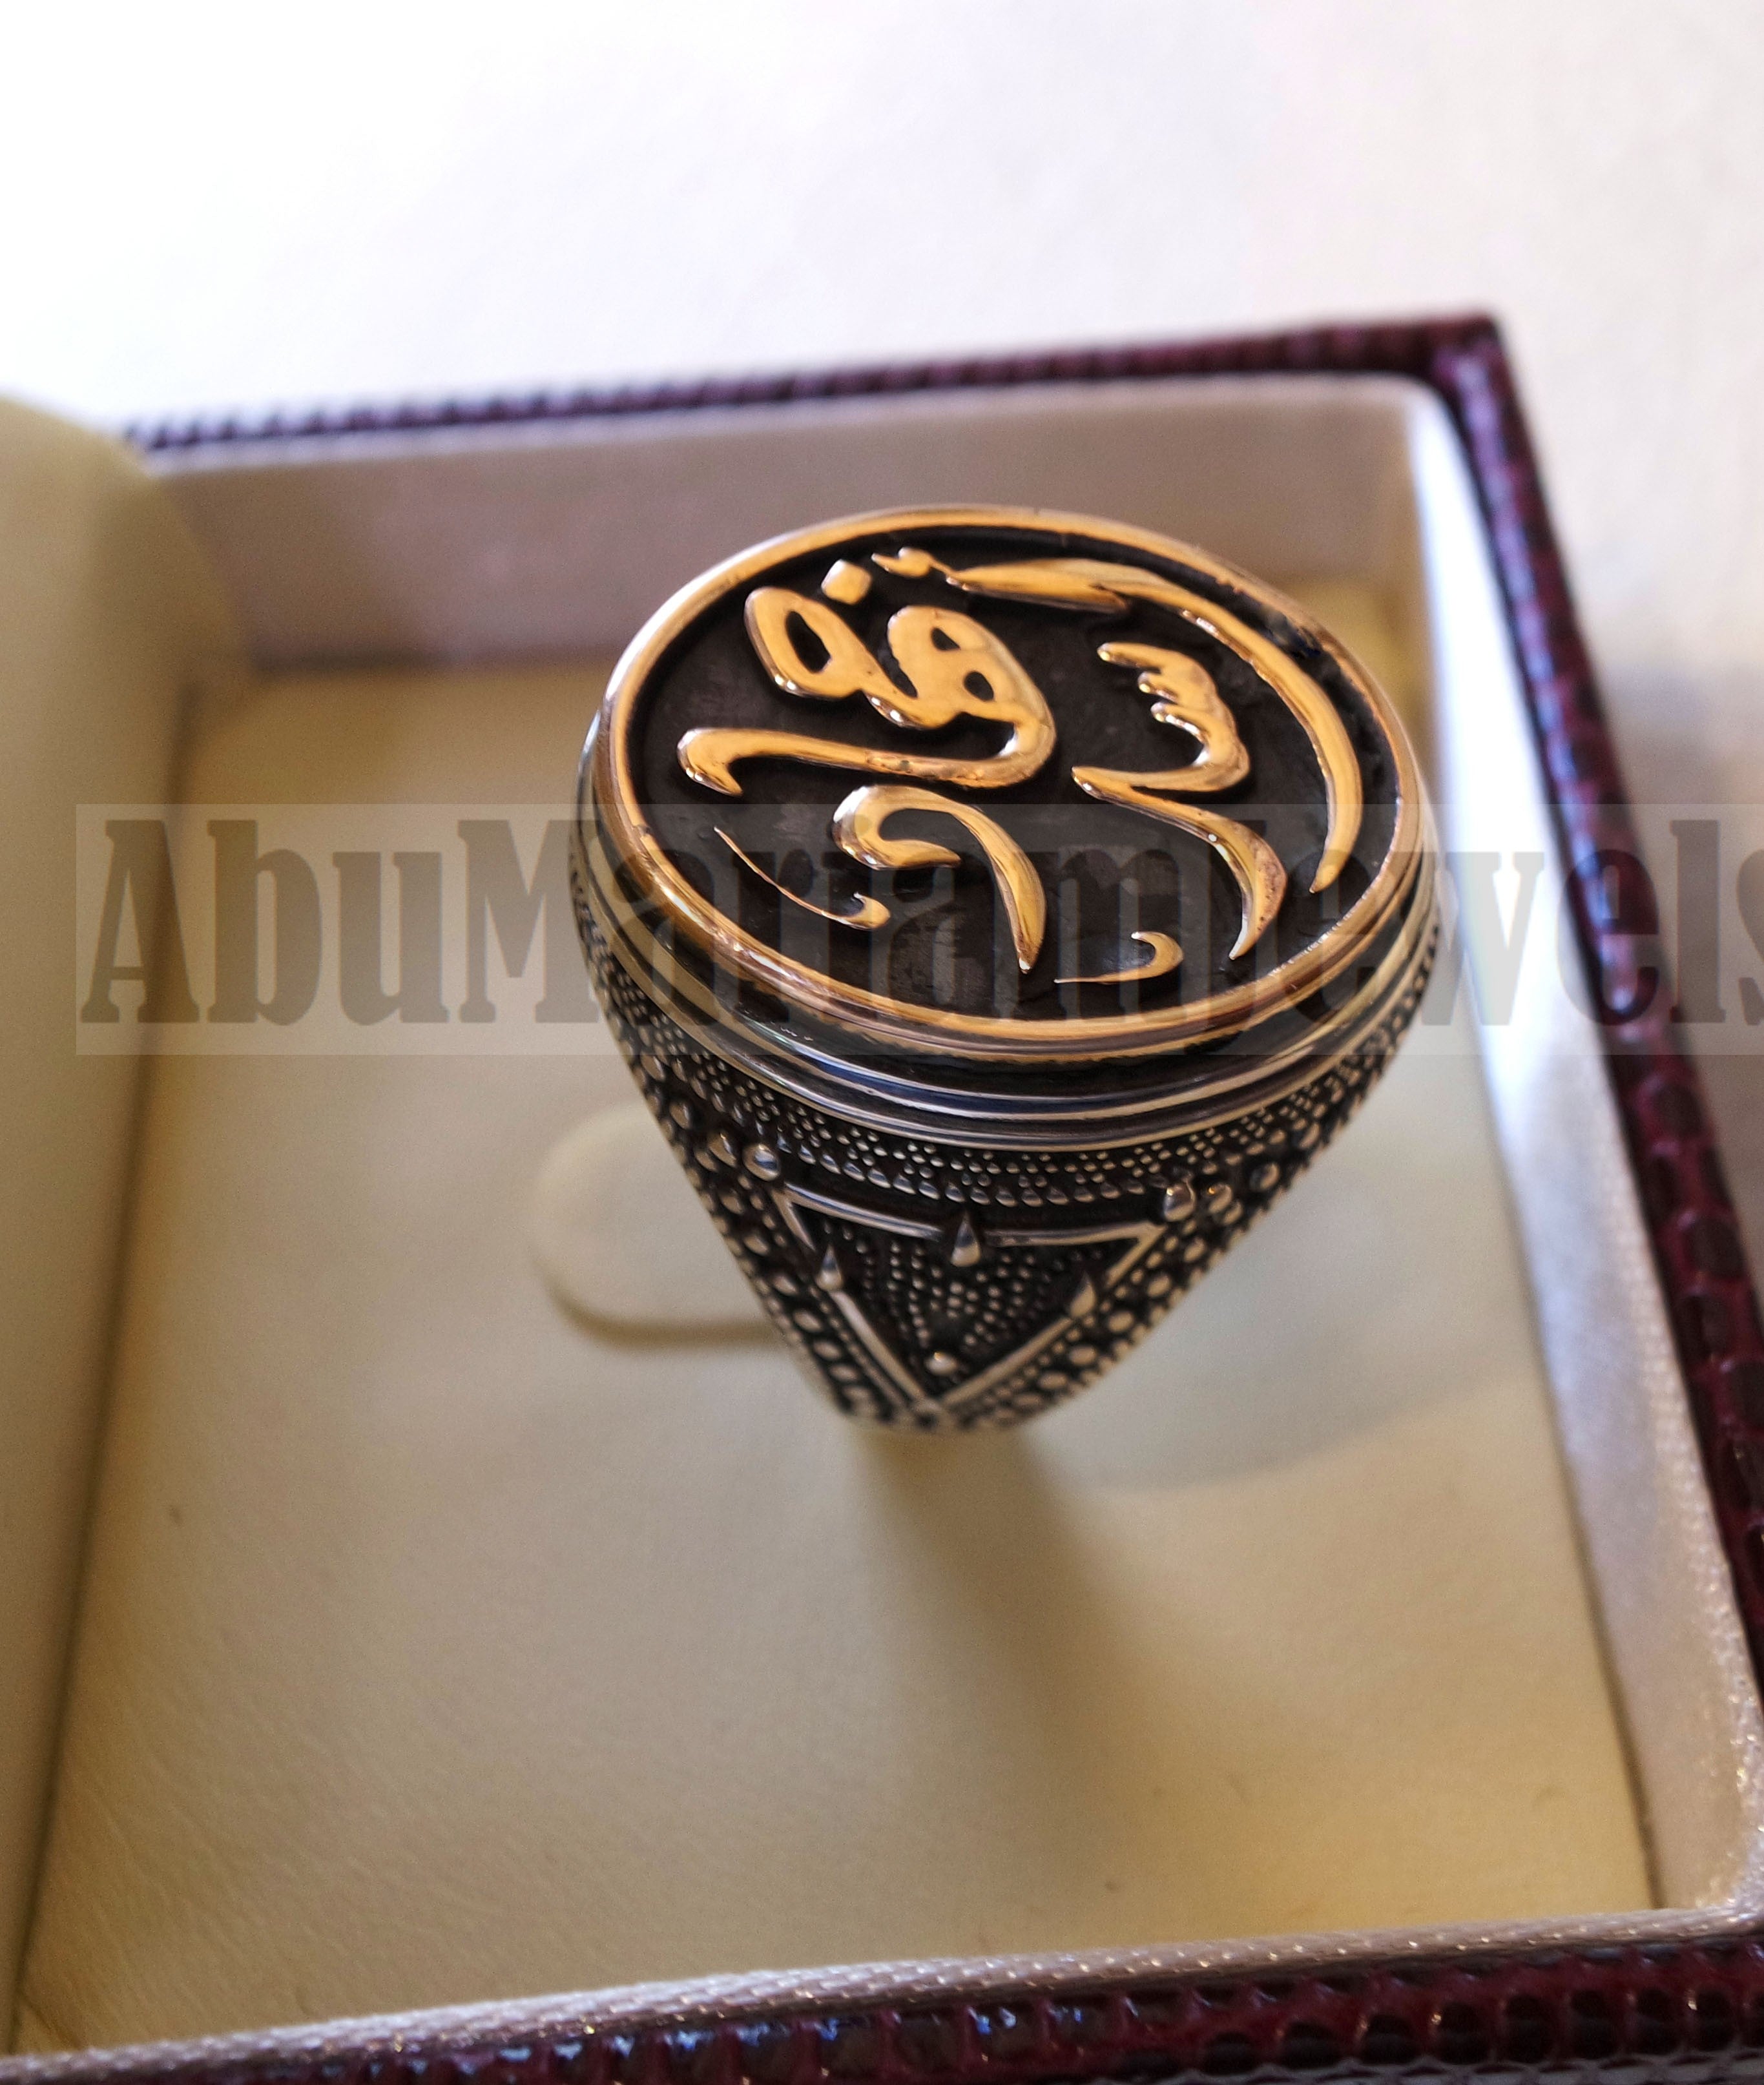 Customized Arabic calligraphy names ring personalized antique jewelry style sterling silver 925 and bronze any size TSB1010 خاتم اسم تفصيل